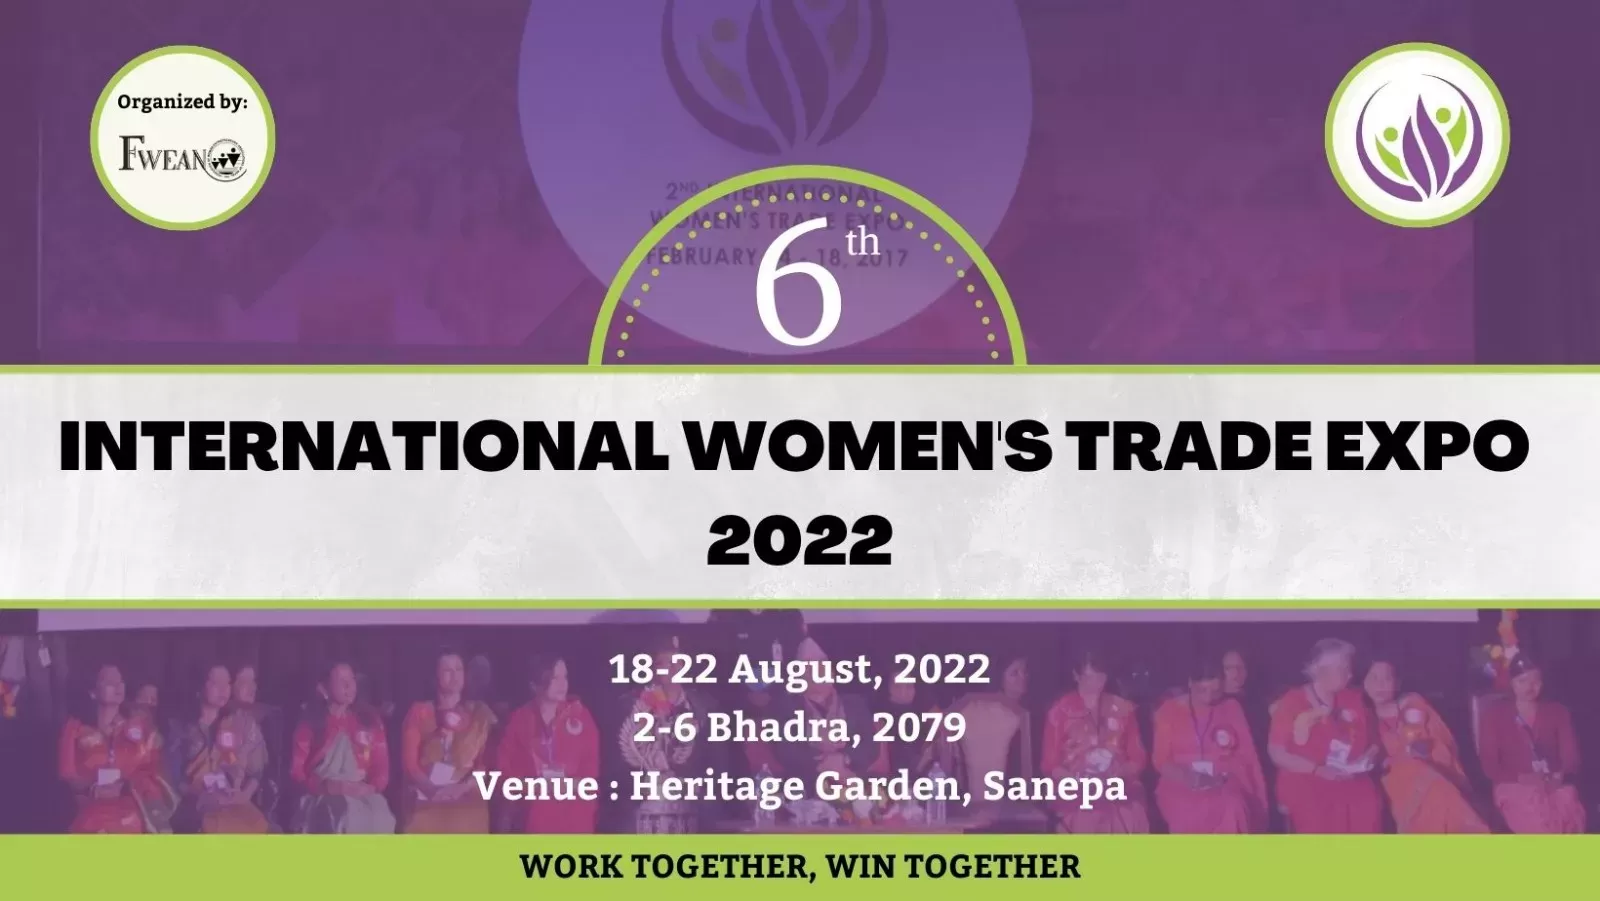 6th International Women's Trade Expo and Symposium